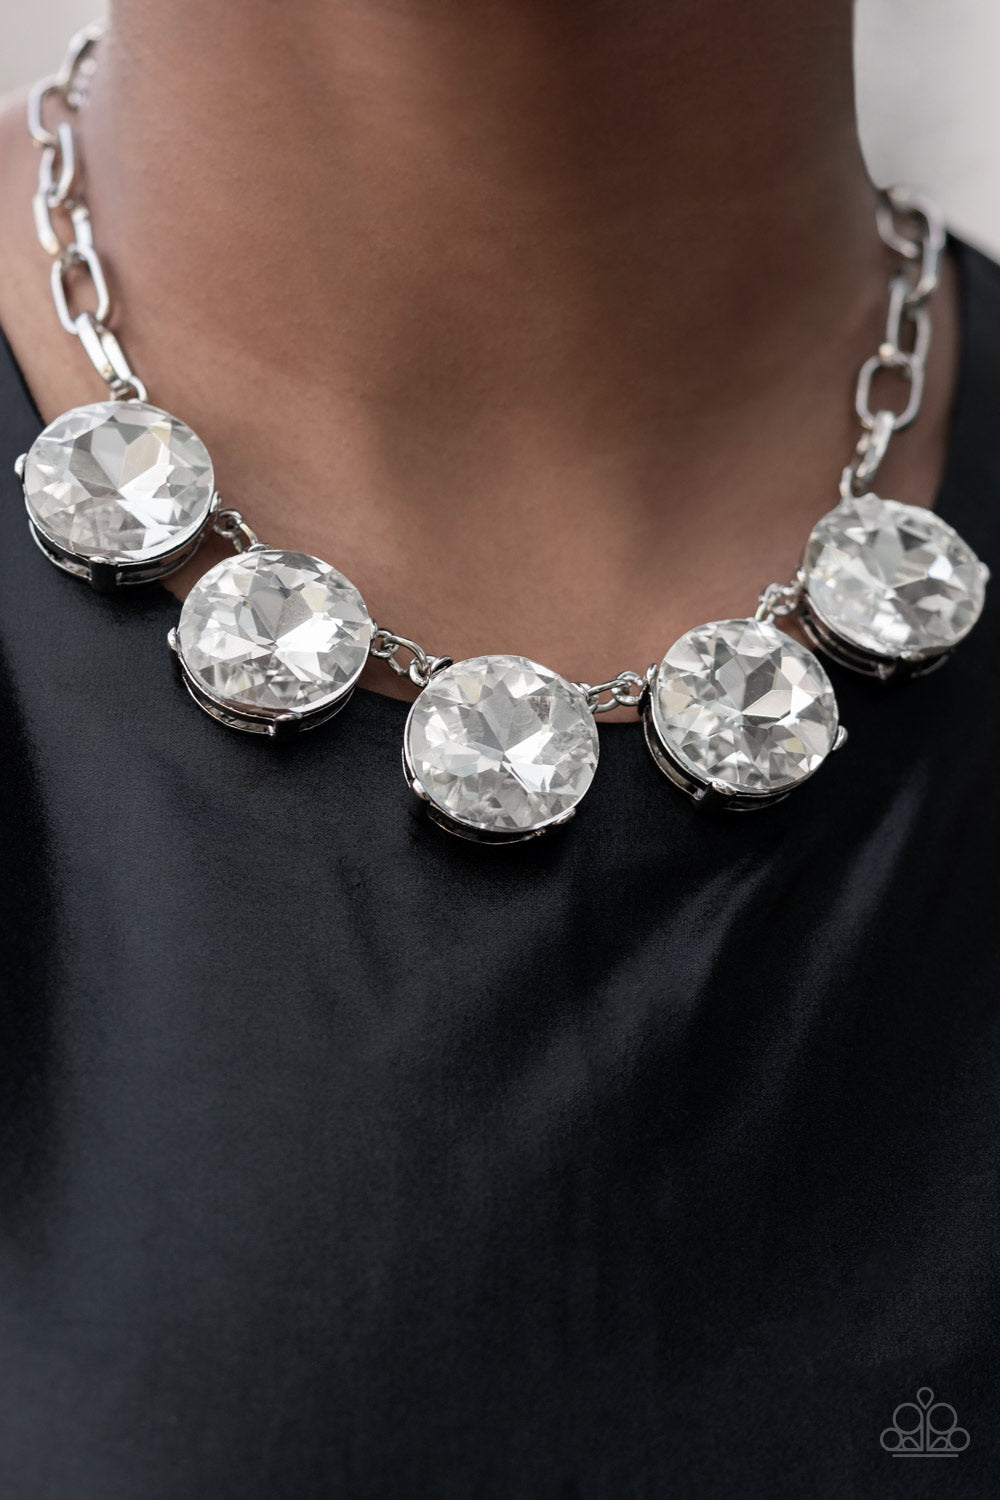 Set in silver pronged fittings, five dramatically oversized brilliant white rhinestones connect across the collar and attach to an oversized silver chain creating a stunning spot-light loving statement piece. Features an adjustable clasp closure.  Sold as one individual necklace. Includes one pair of matching earrings.